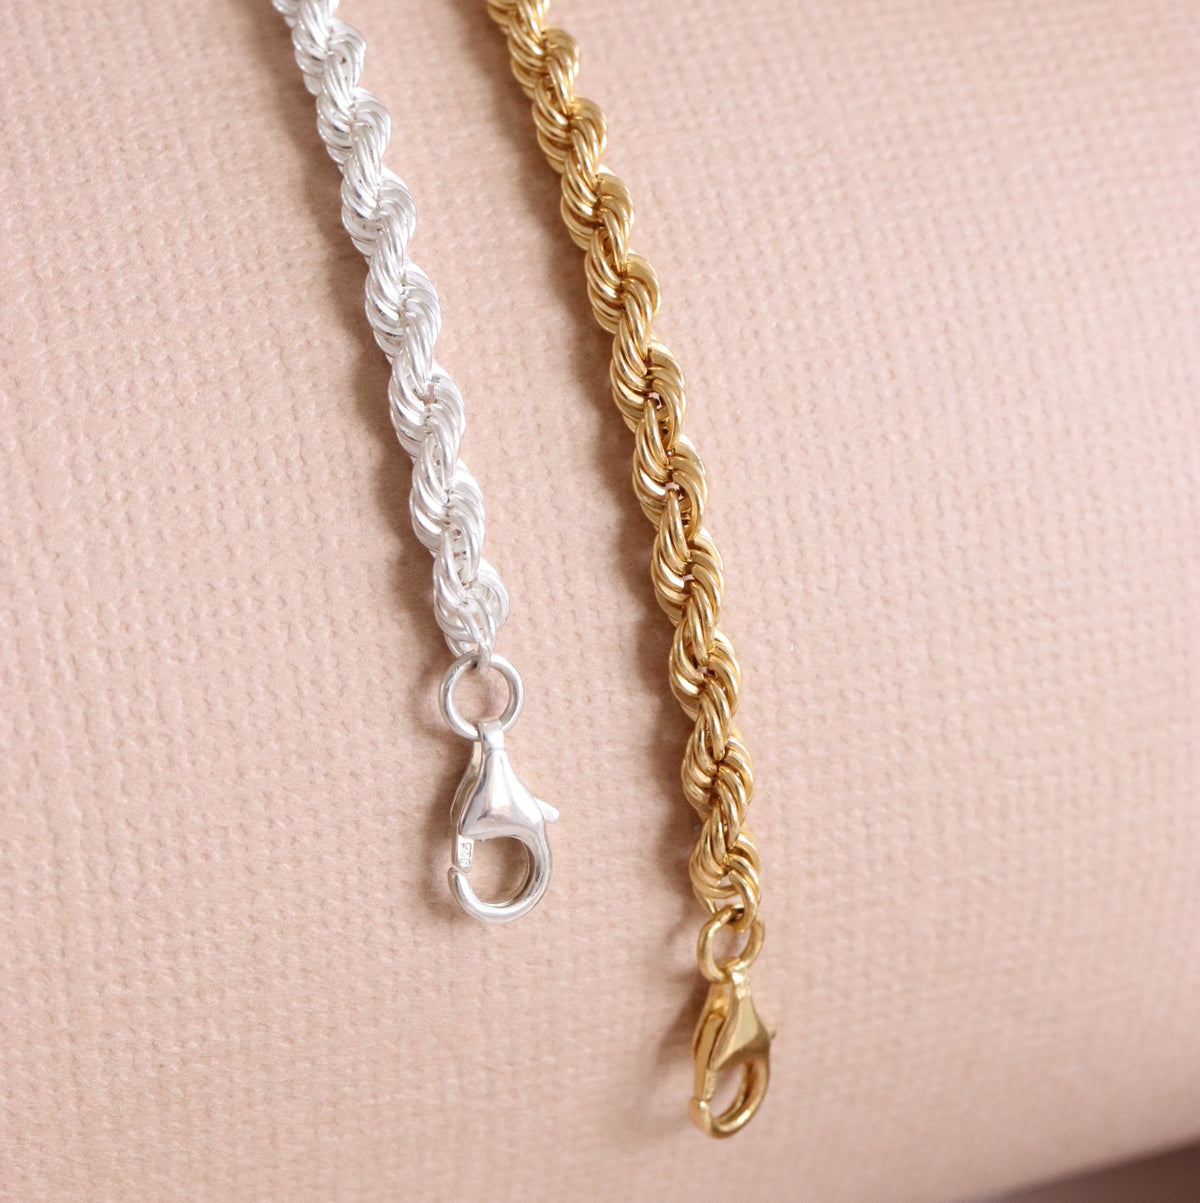 FEARLESS TWISTED ROPE CHAIN 15-17 NECKLACE SILVER